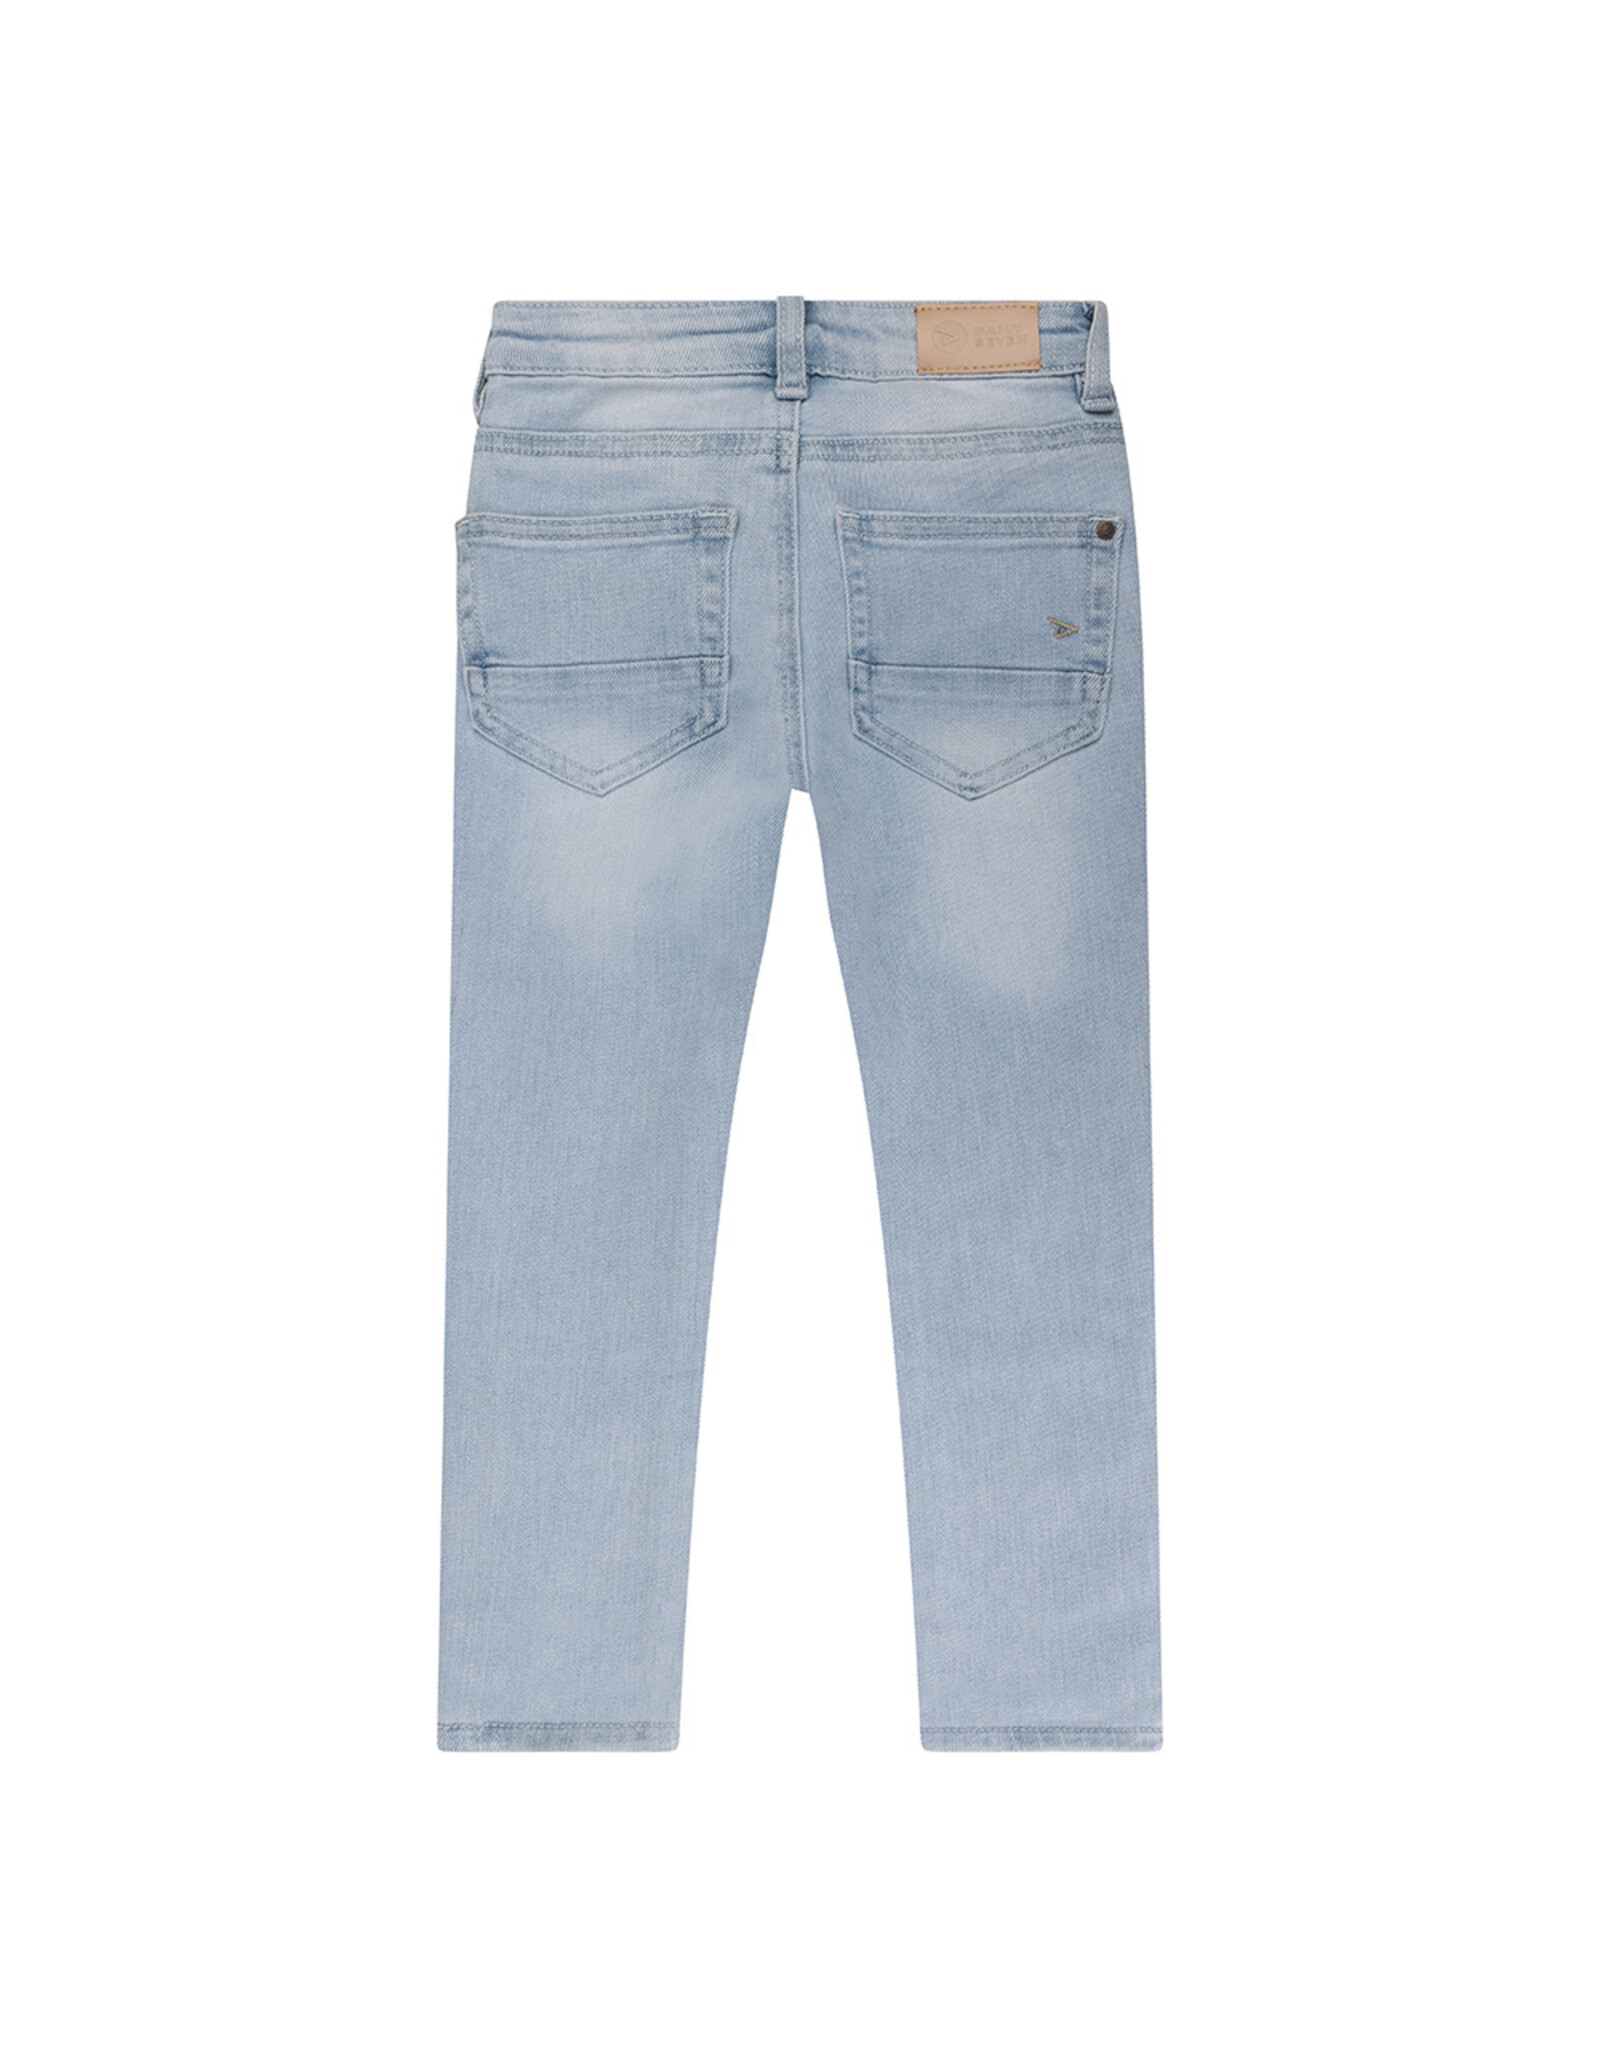 Daily7 Connor Skinny Fit Light Denim-150